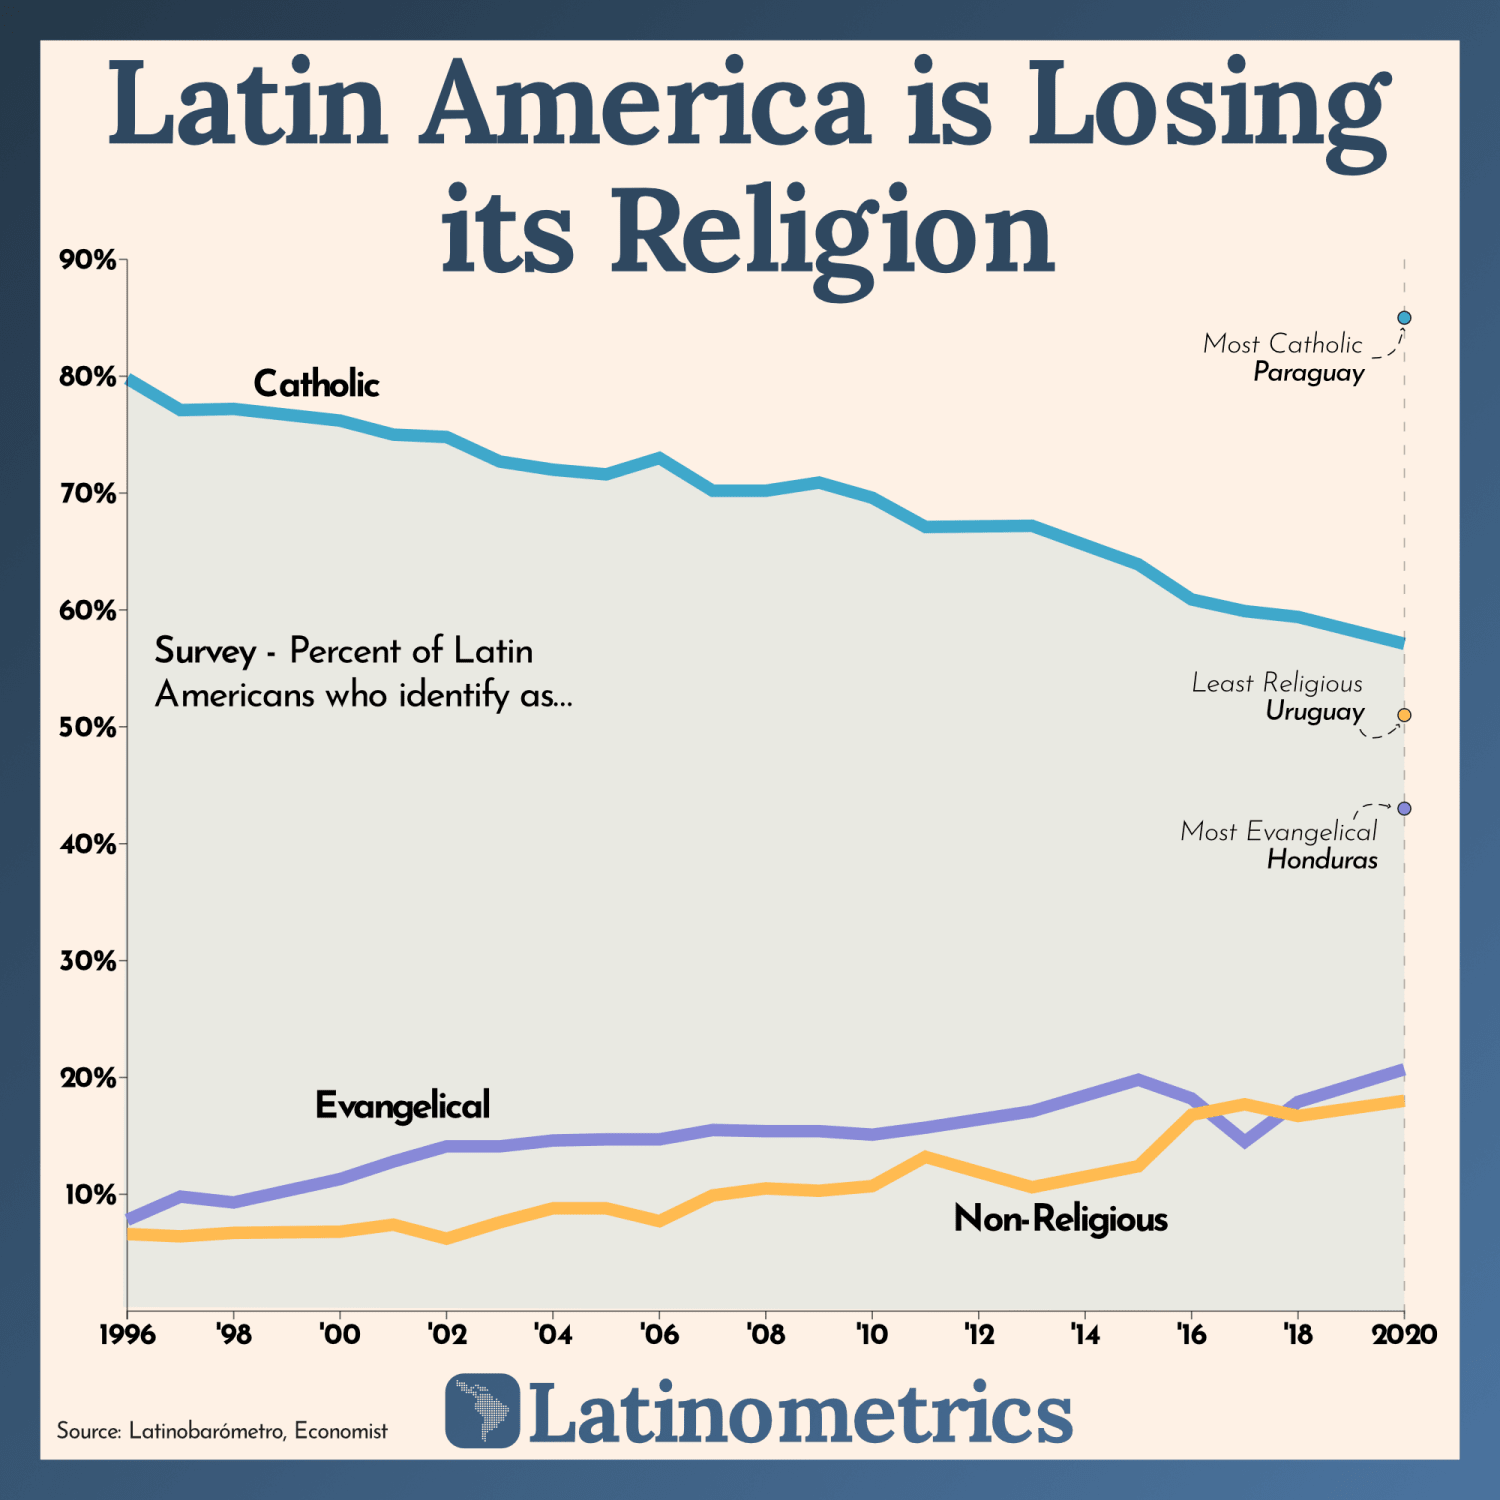 Even with an Argentinian pope, Latin Americans are turning their backs on their Catholic faith.